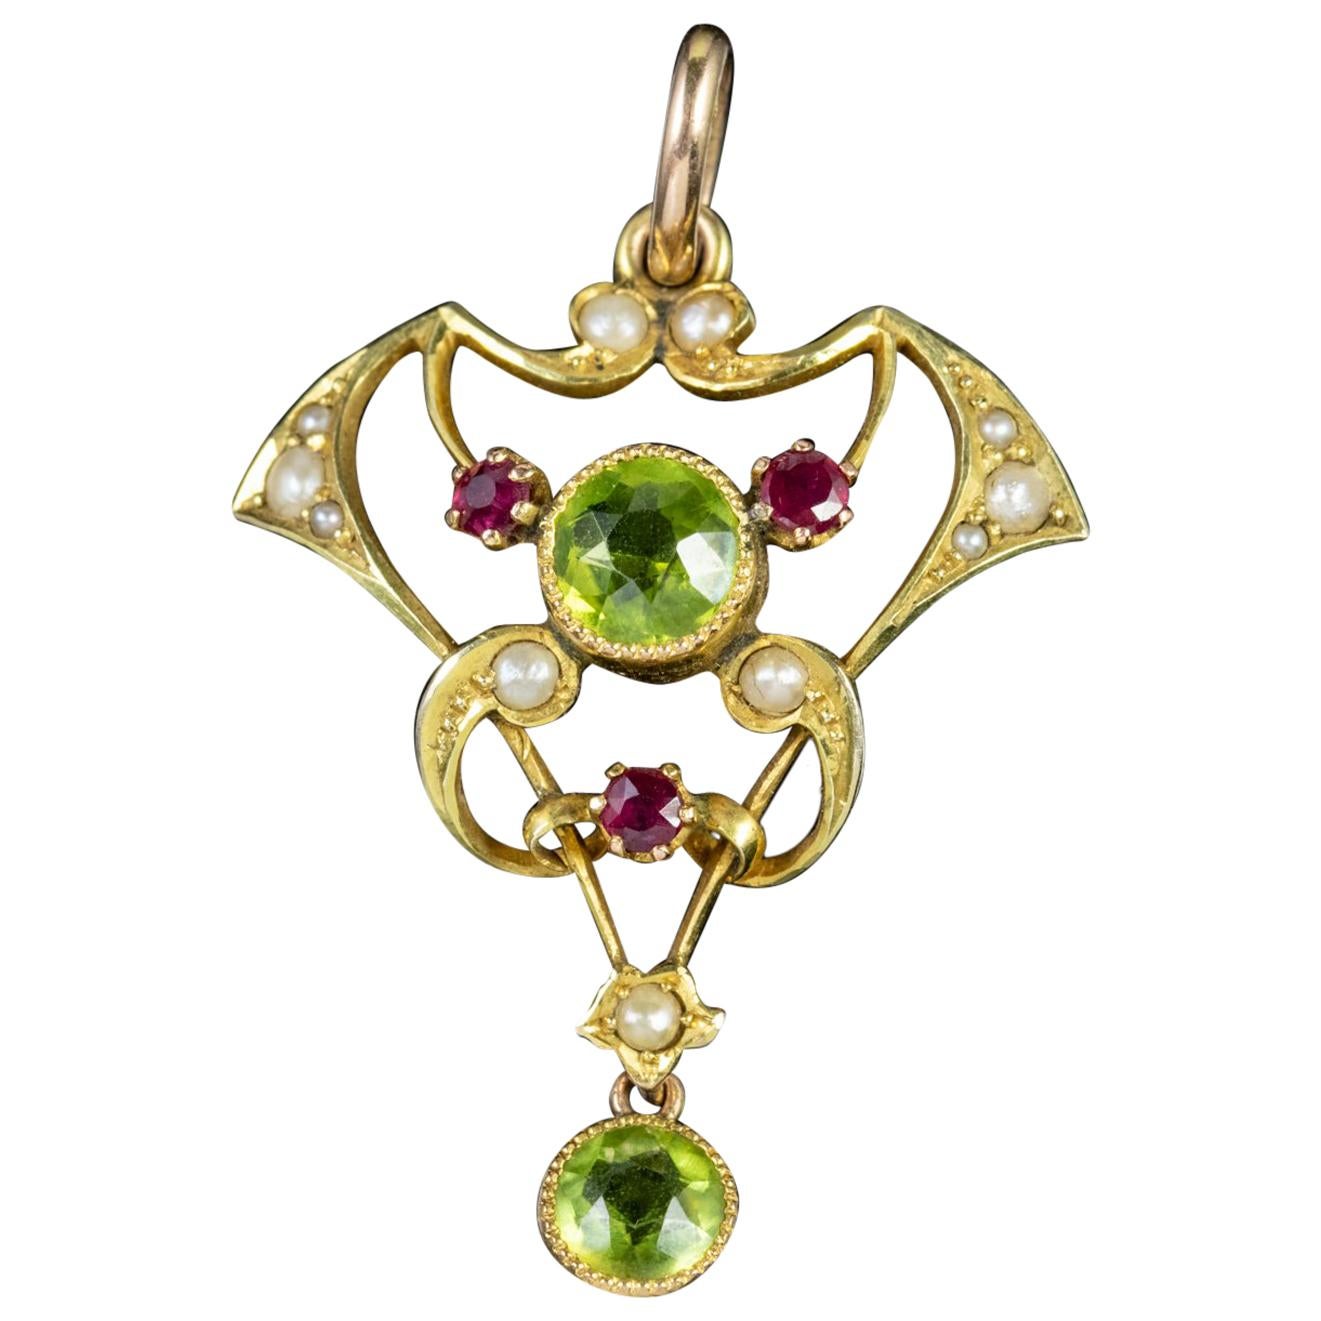 Antique Edwardian 9 Carat Gold Ruby Peridot Pearl Pendant For Sale